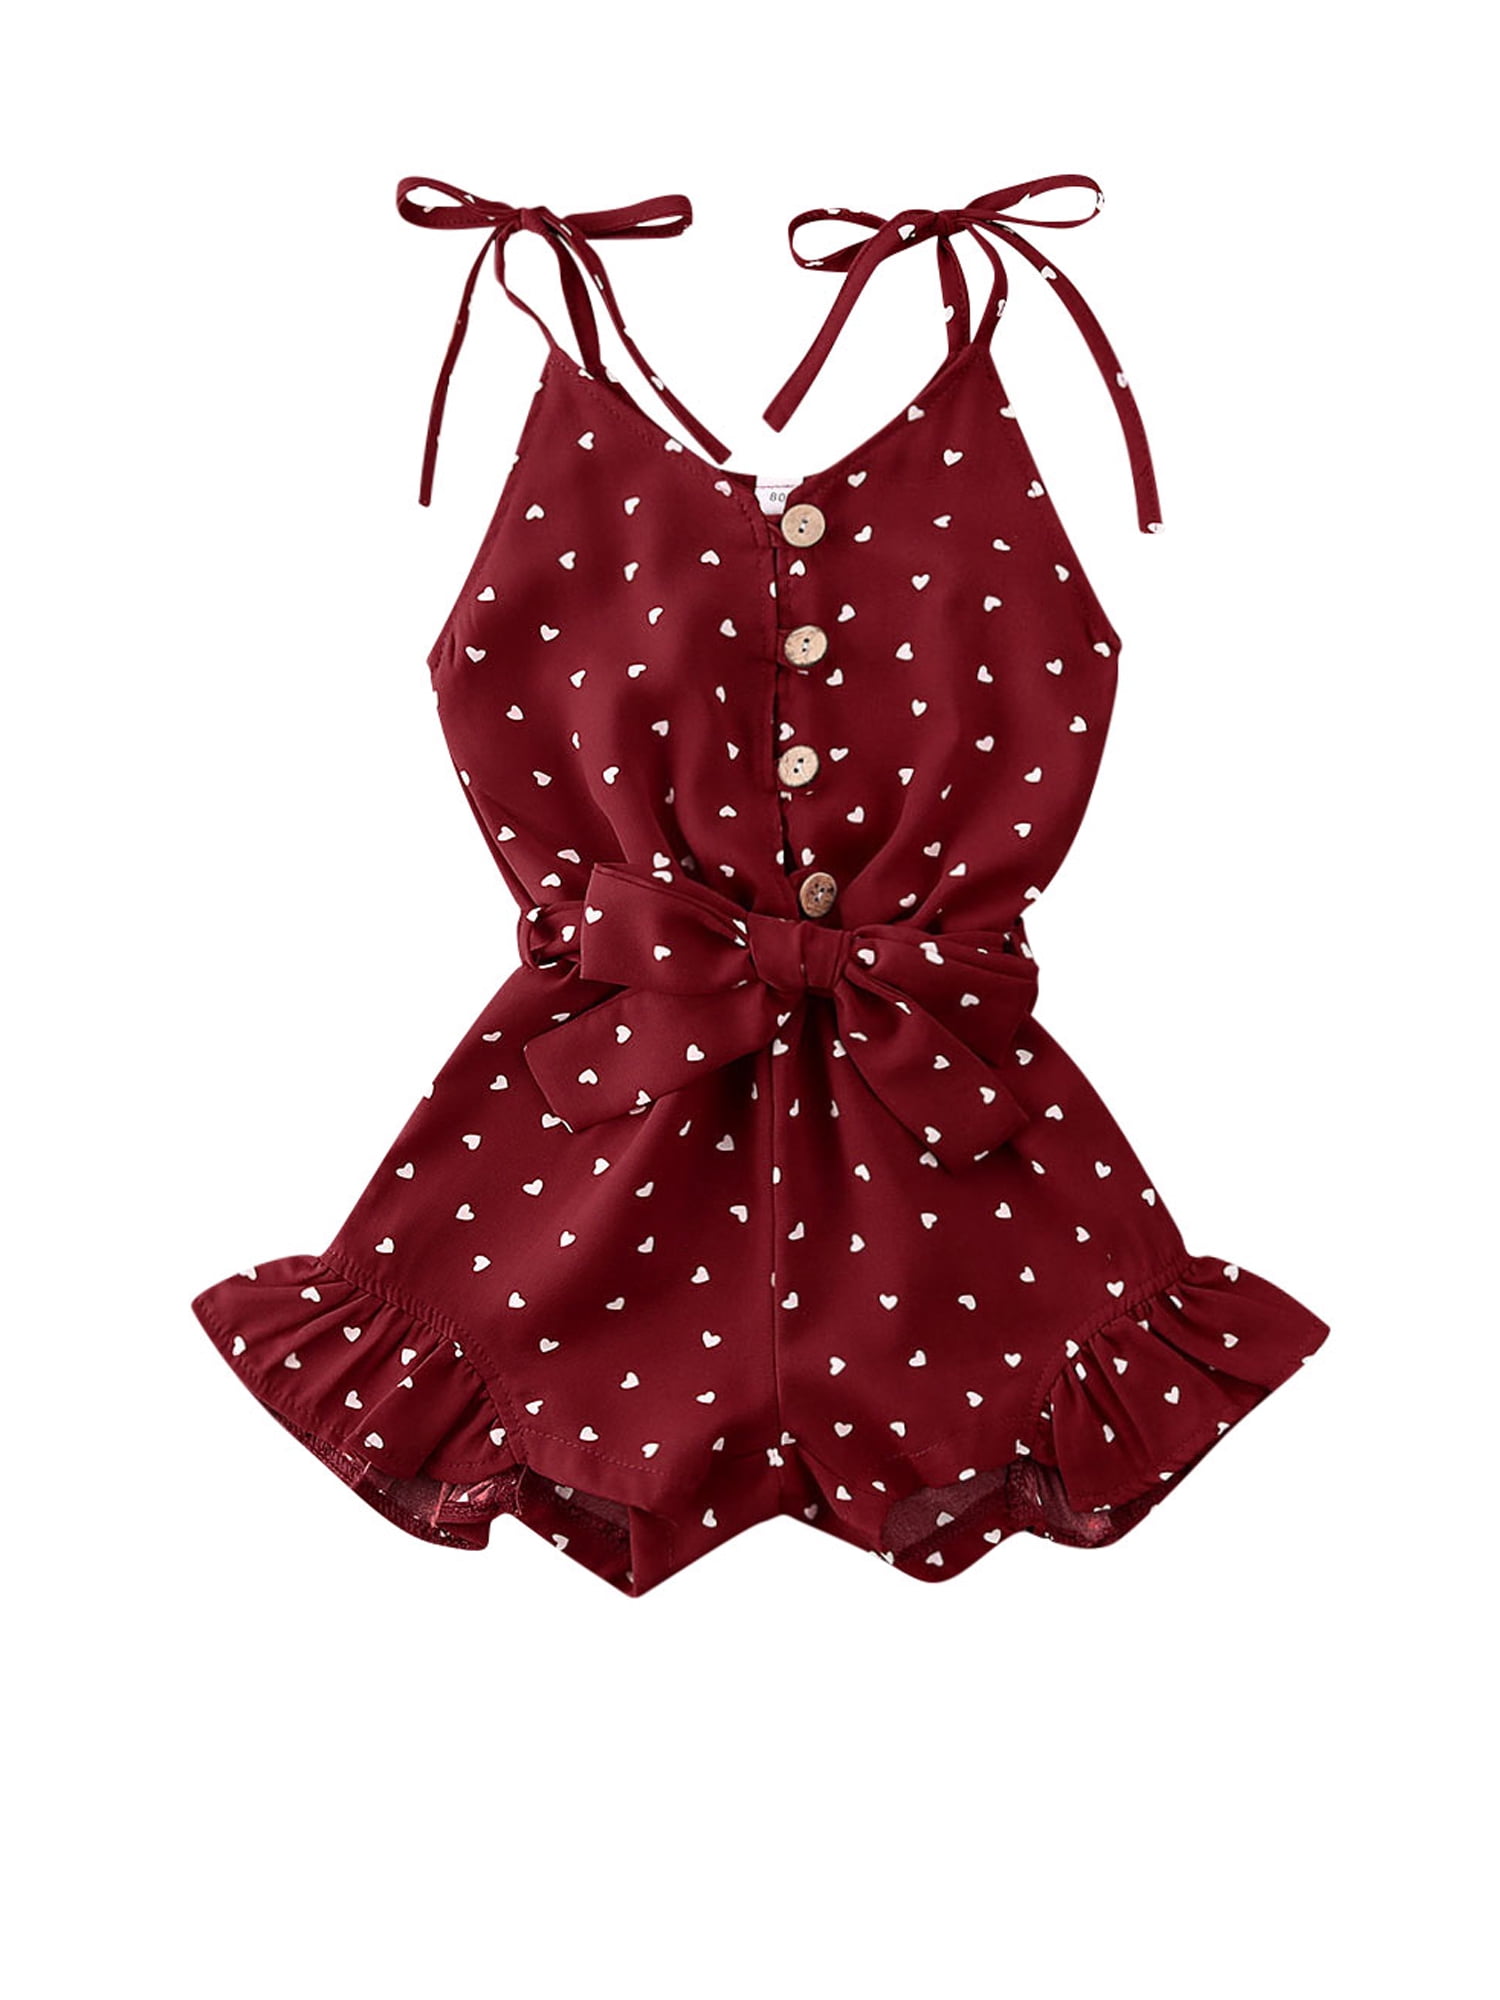 Toddler Baby Girl Polka dot Jumpsuit Floral Playsuit Sleeveless Bodysuit Clothes